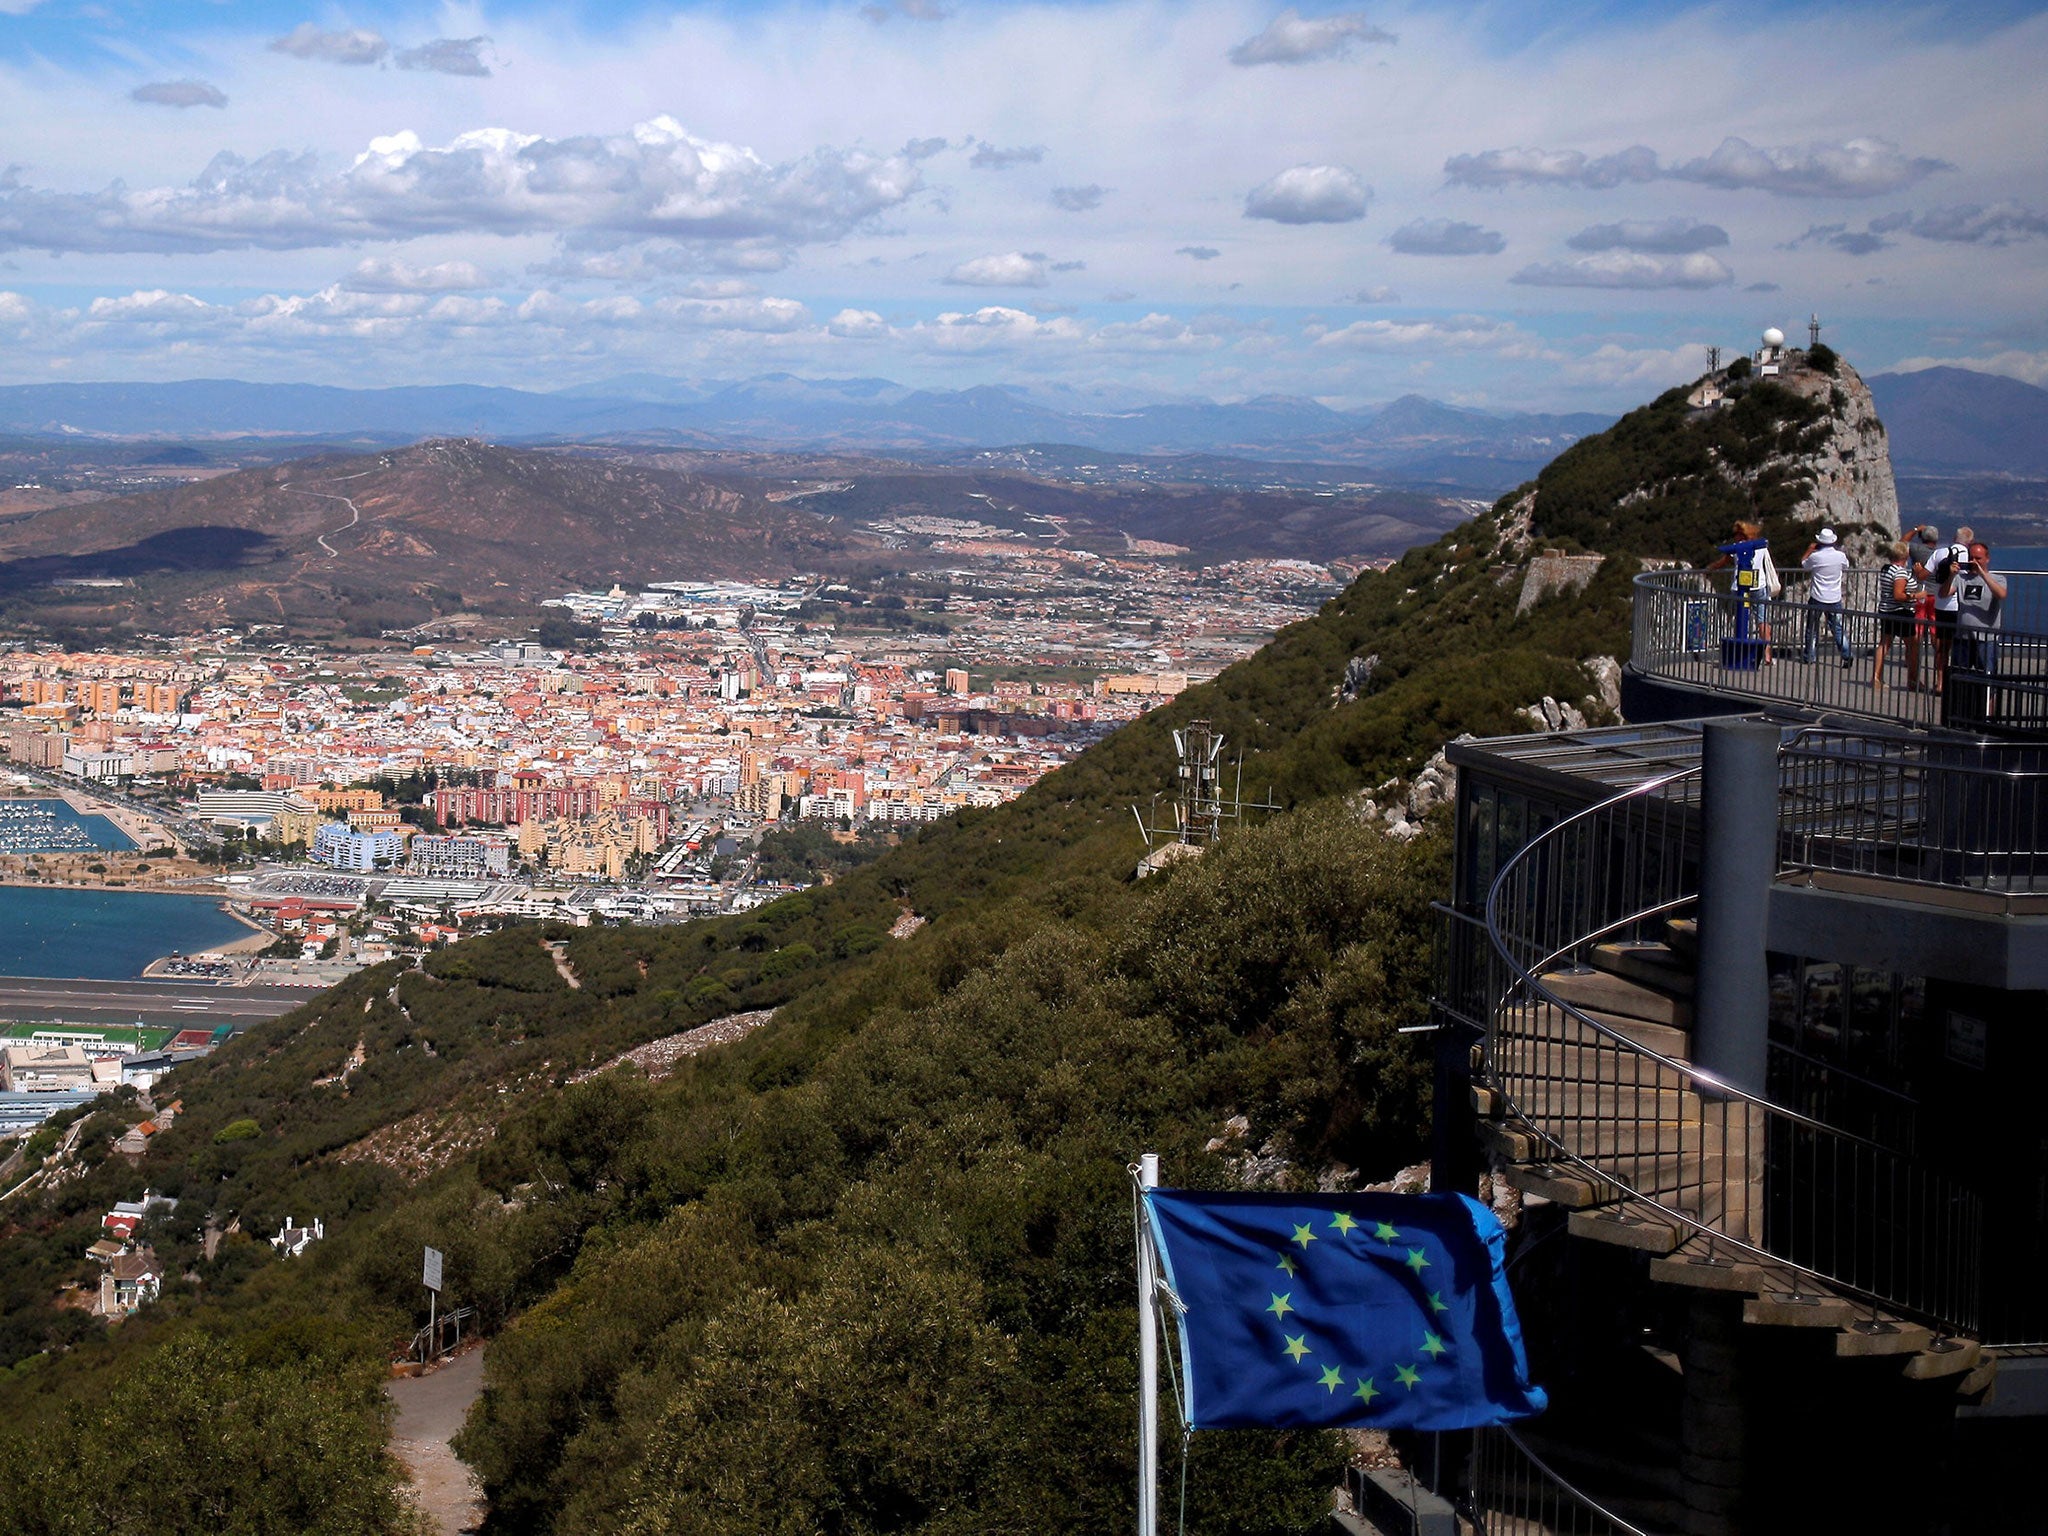 Gibraltar flies the EU flag now, and only 4 per cent of residents voted for Brexit